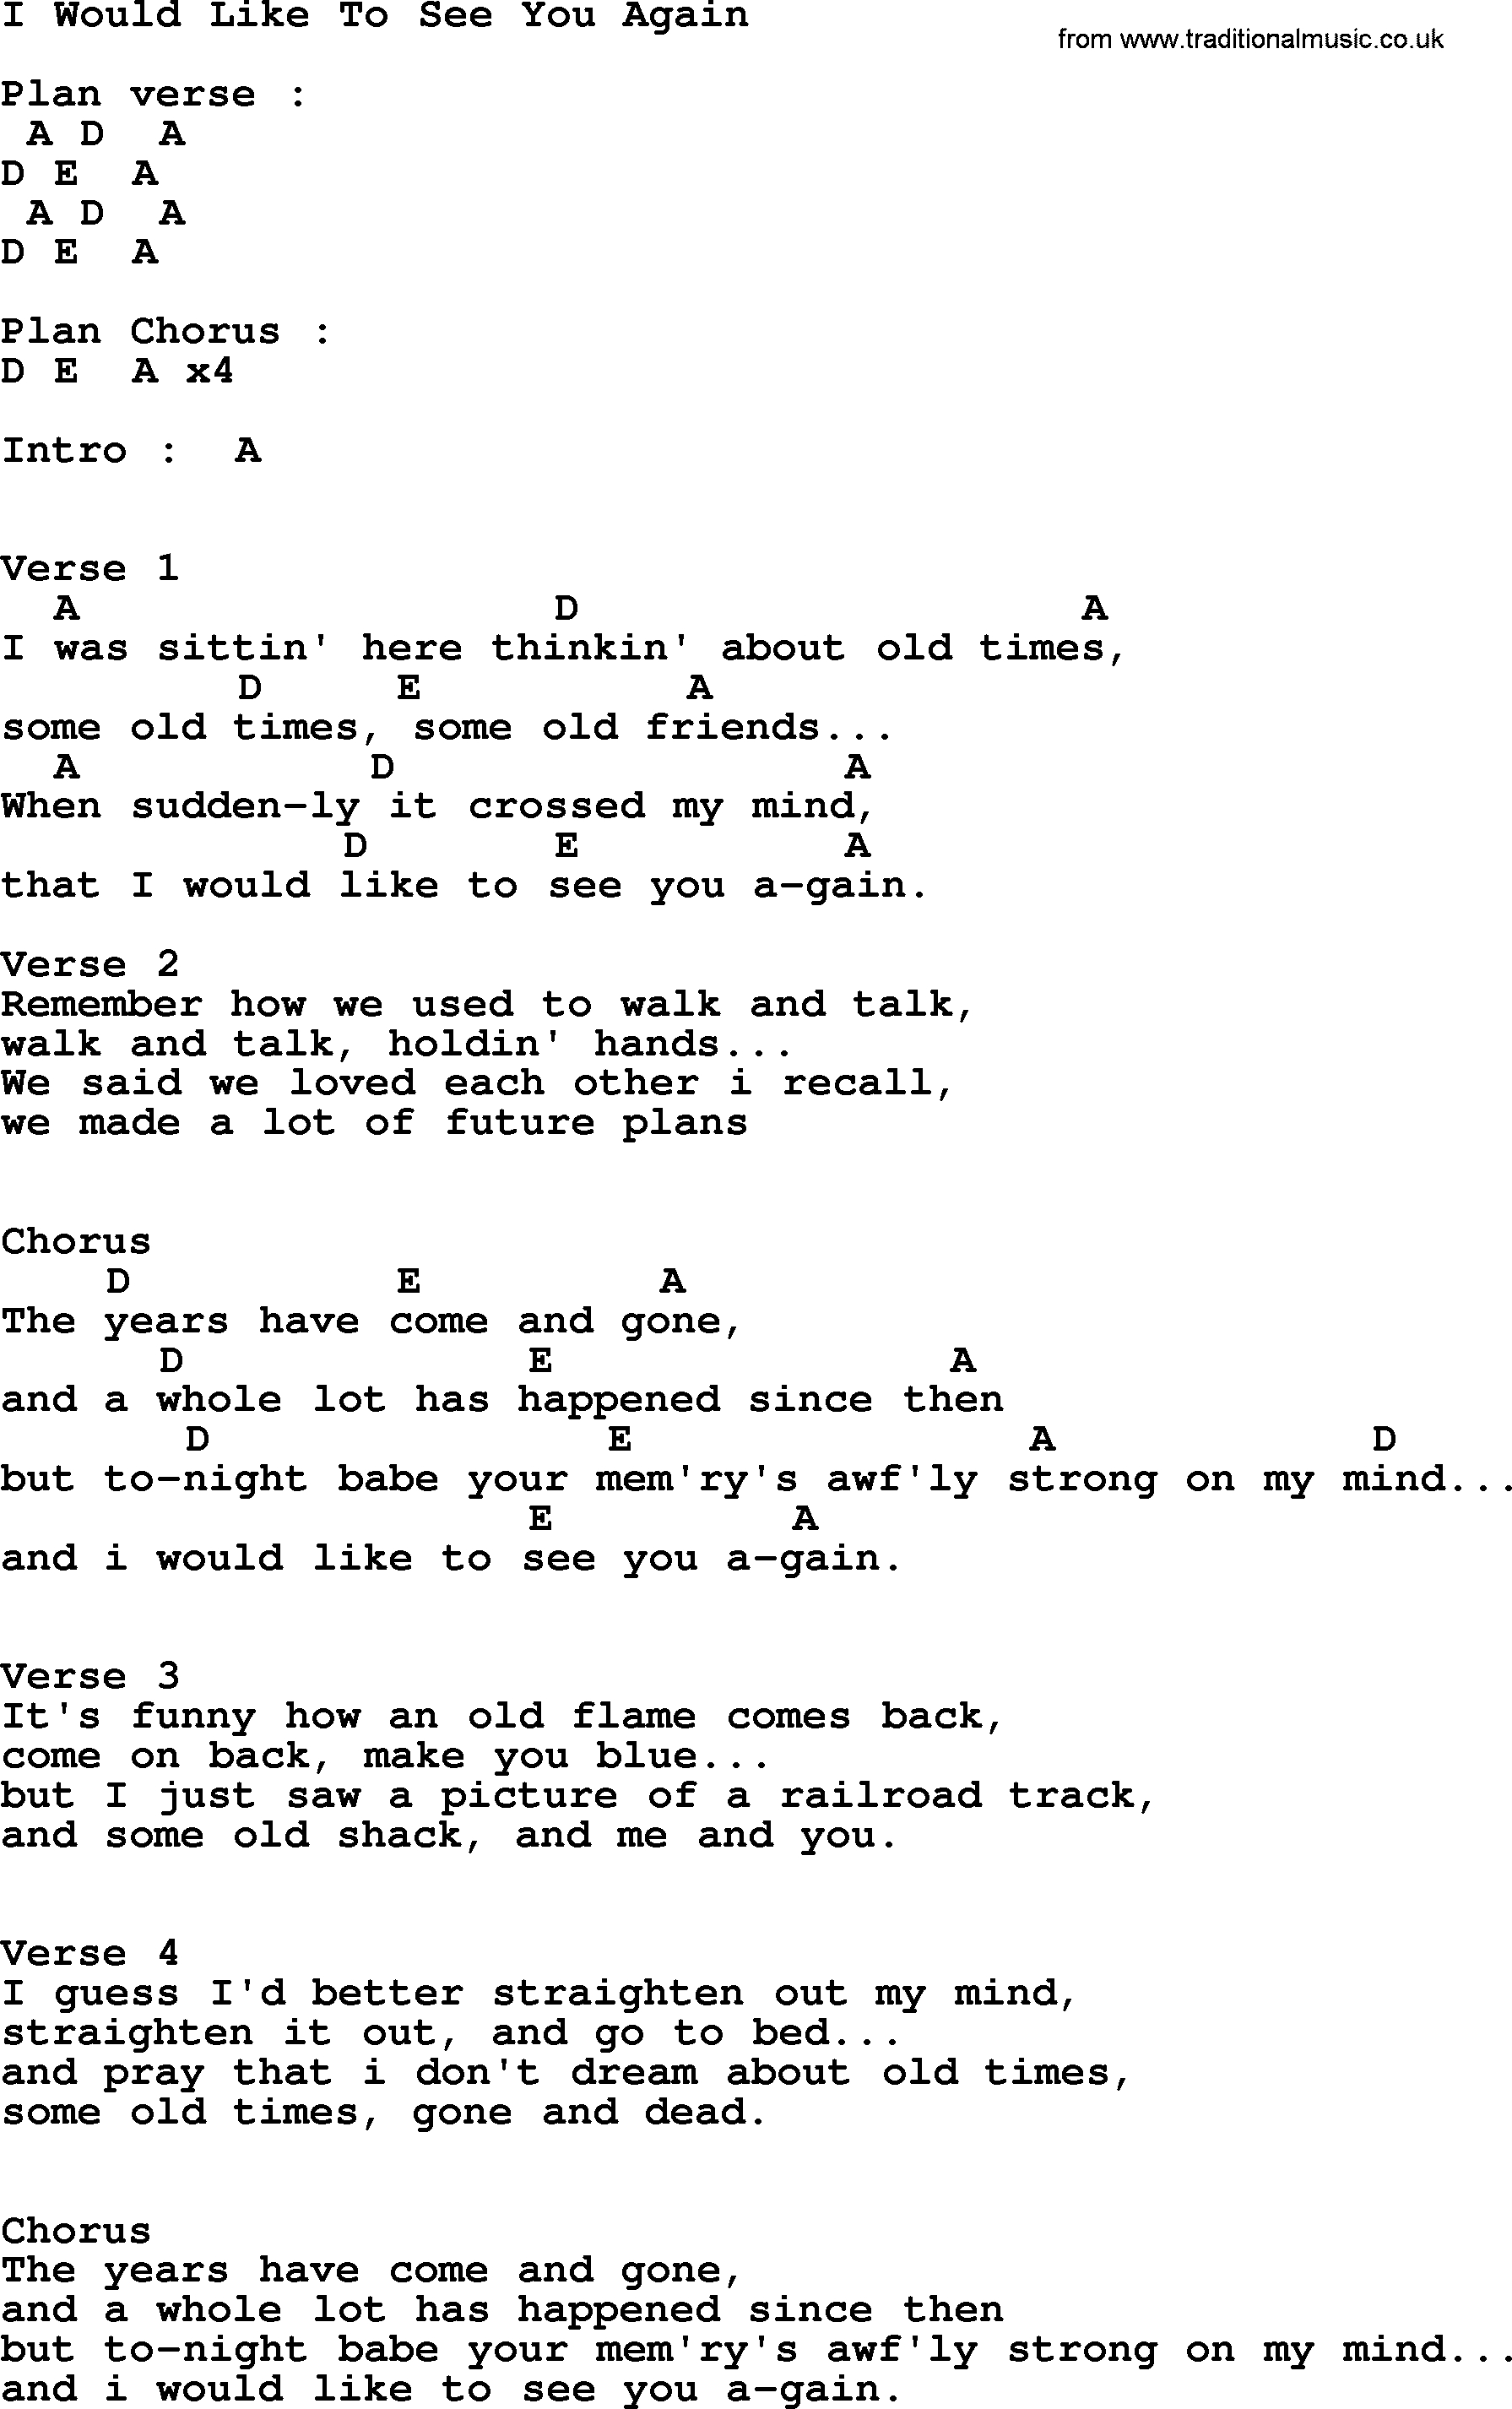 See You Again Chords Johnny Cash Song I Would Like To See You Again Lyrics And Chords